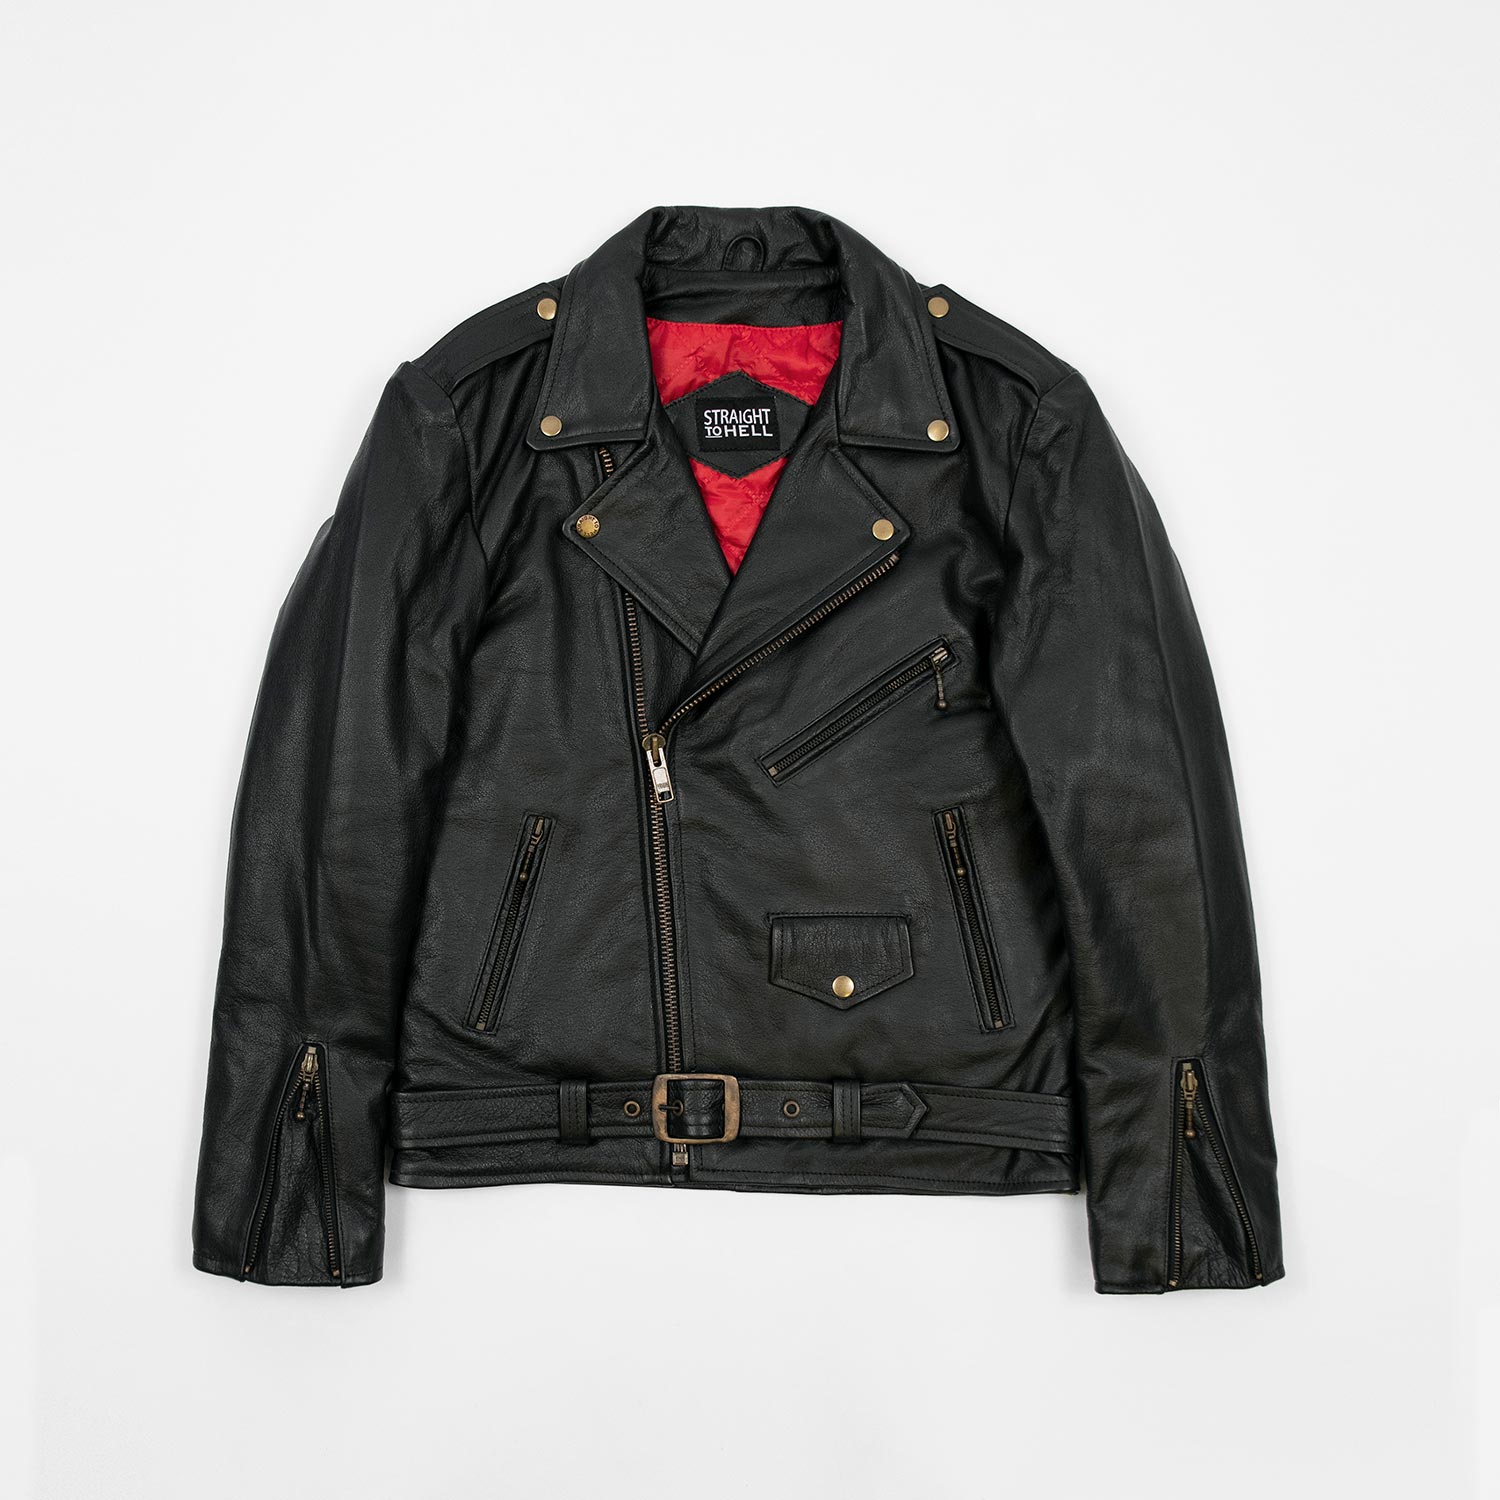 straight To hell brass leather jacket